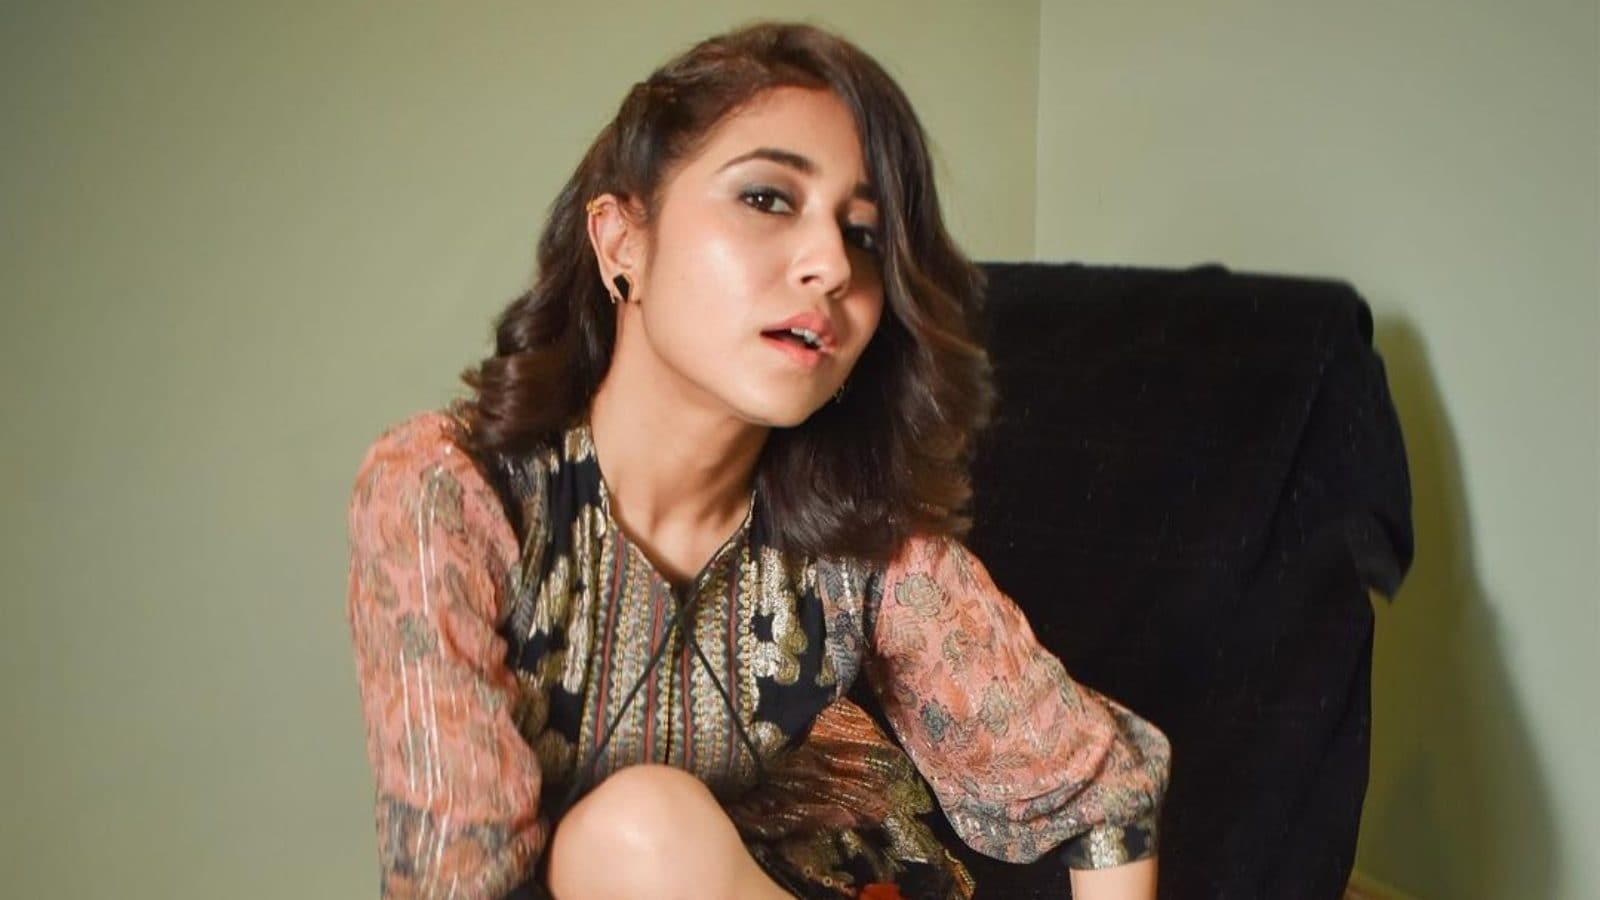 Shweta Tripathi: Don't Want to Limit Myself, Want to Do International, Regional Projects As Well